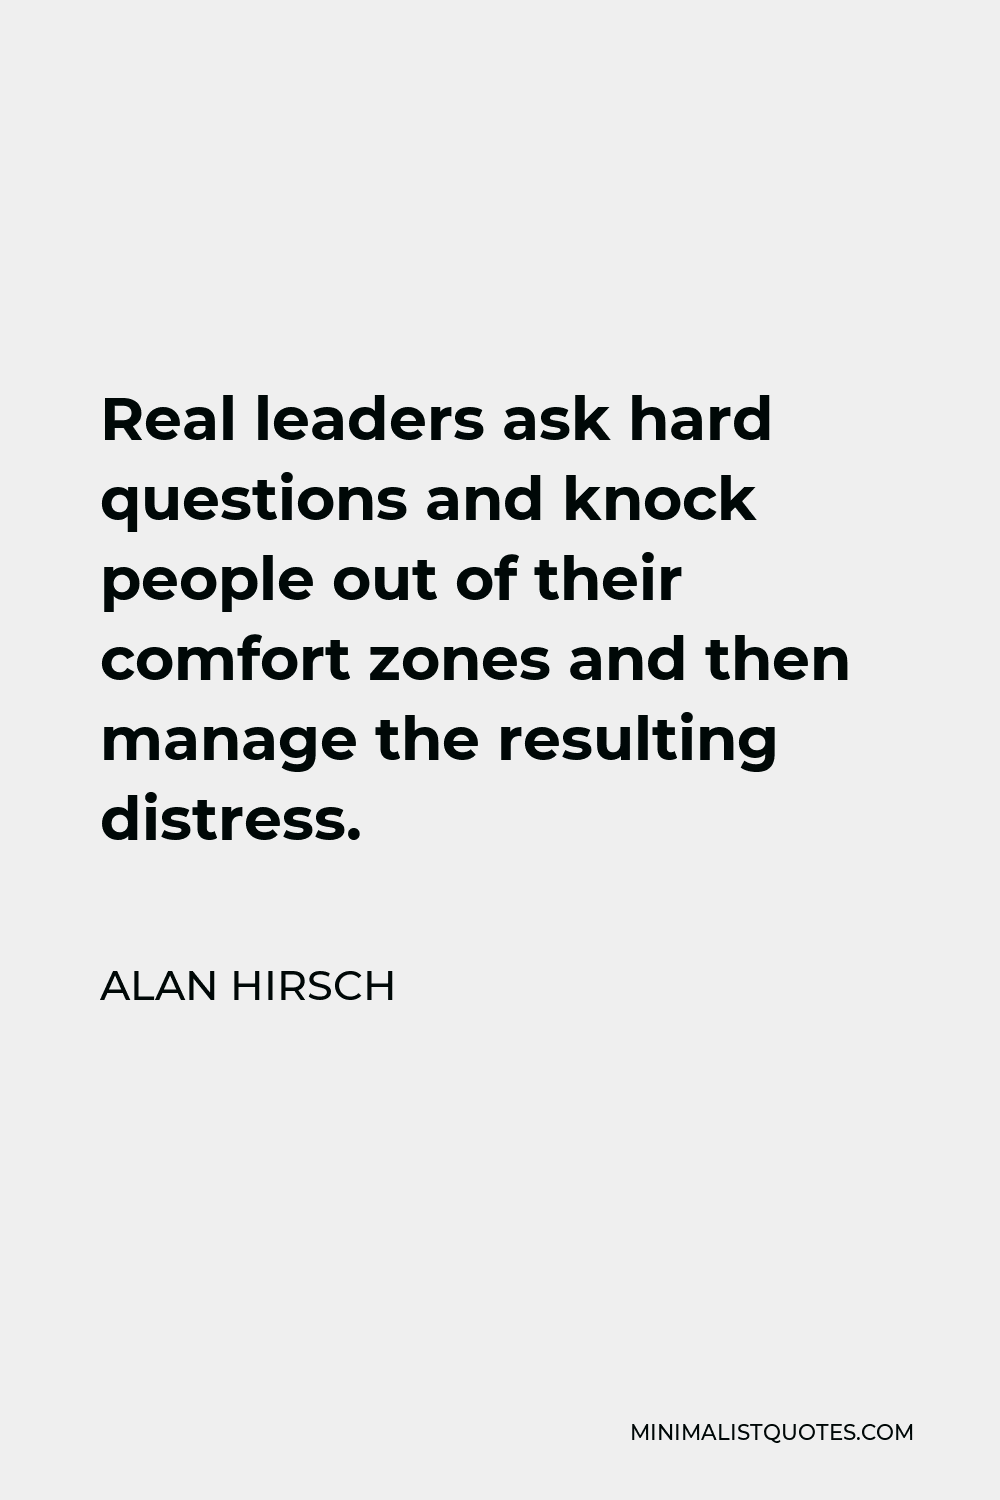 Alan Hirsch Quote - Real leaders ask hard questions and knock people out of their comfort zones and then manage the resulting distress.